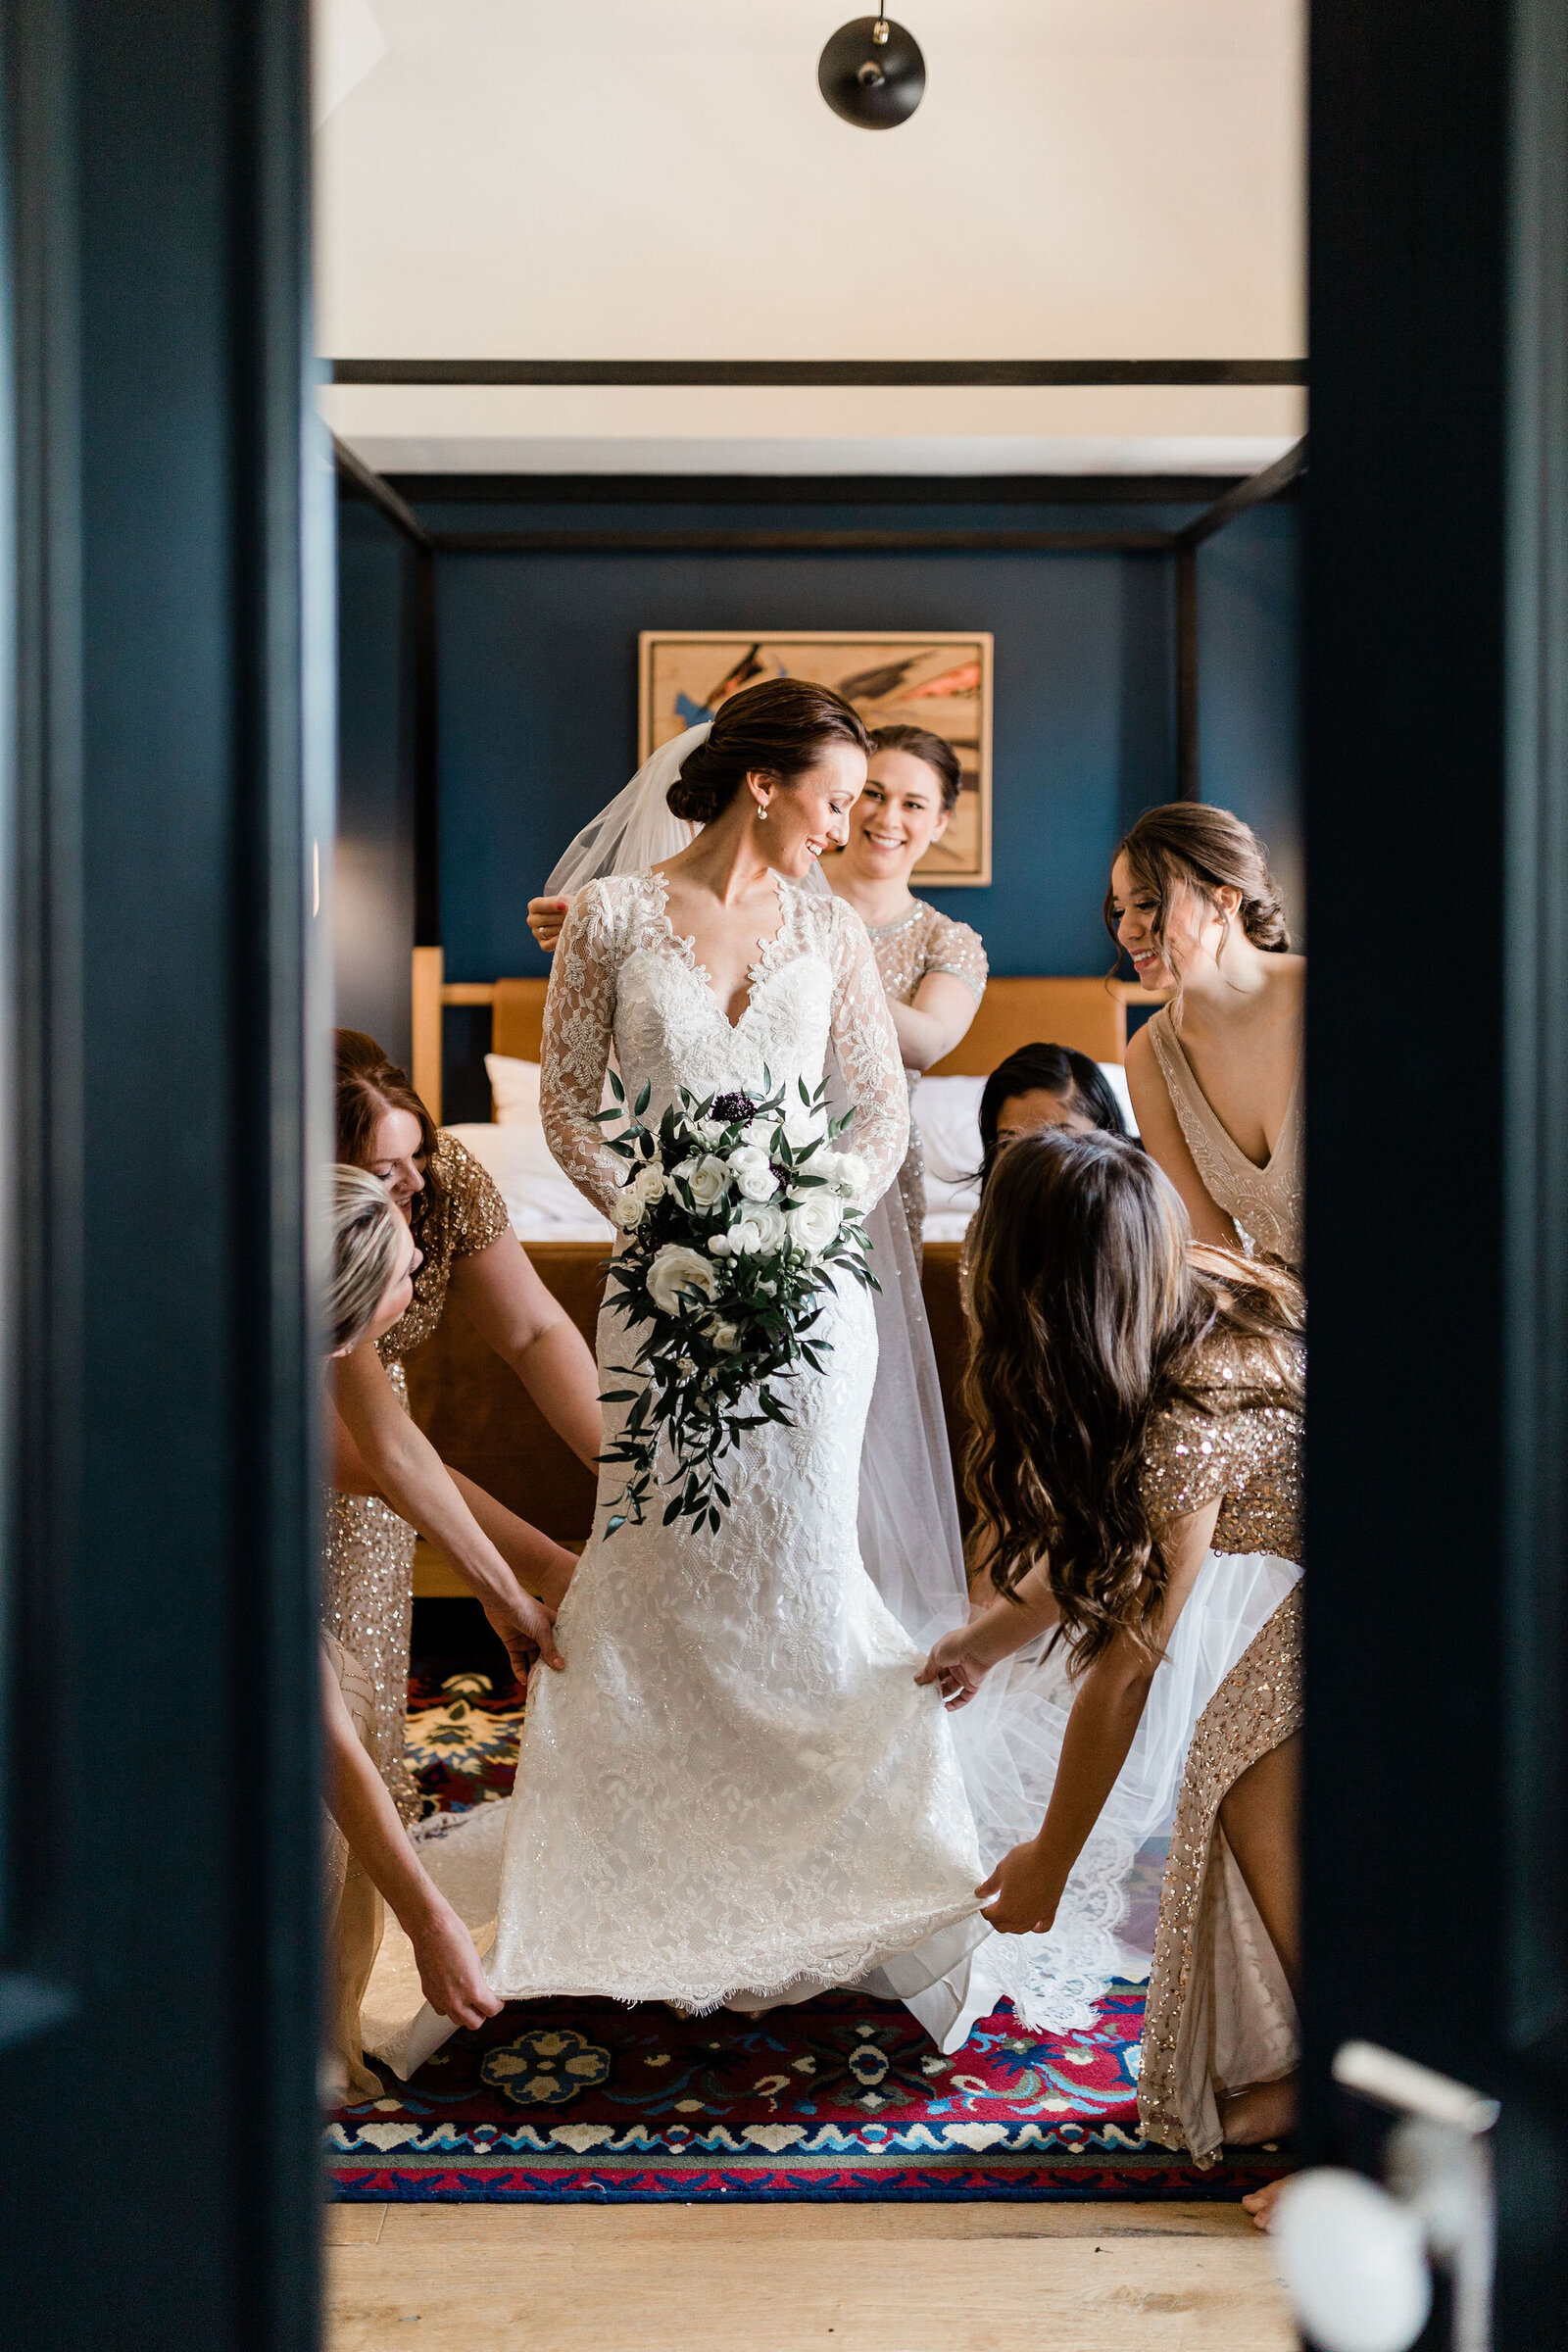 Bride Getting Dressed | The Peabody Library Baltimore MD | The Axtells Photo and Film